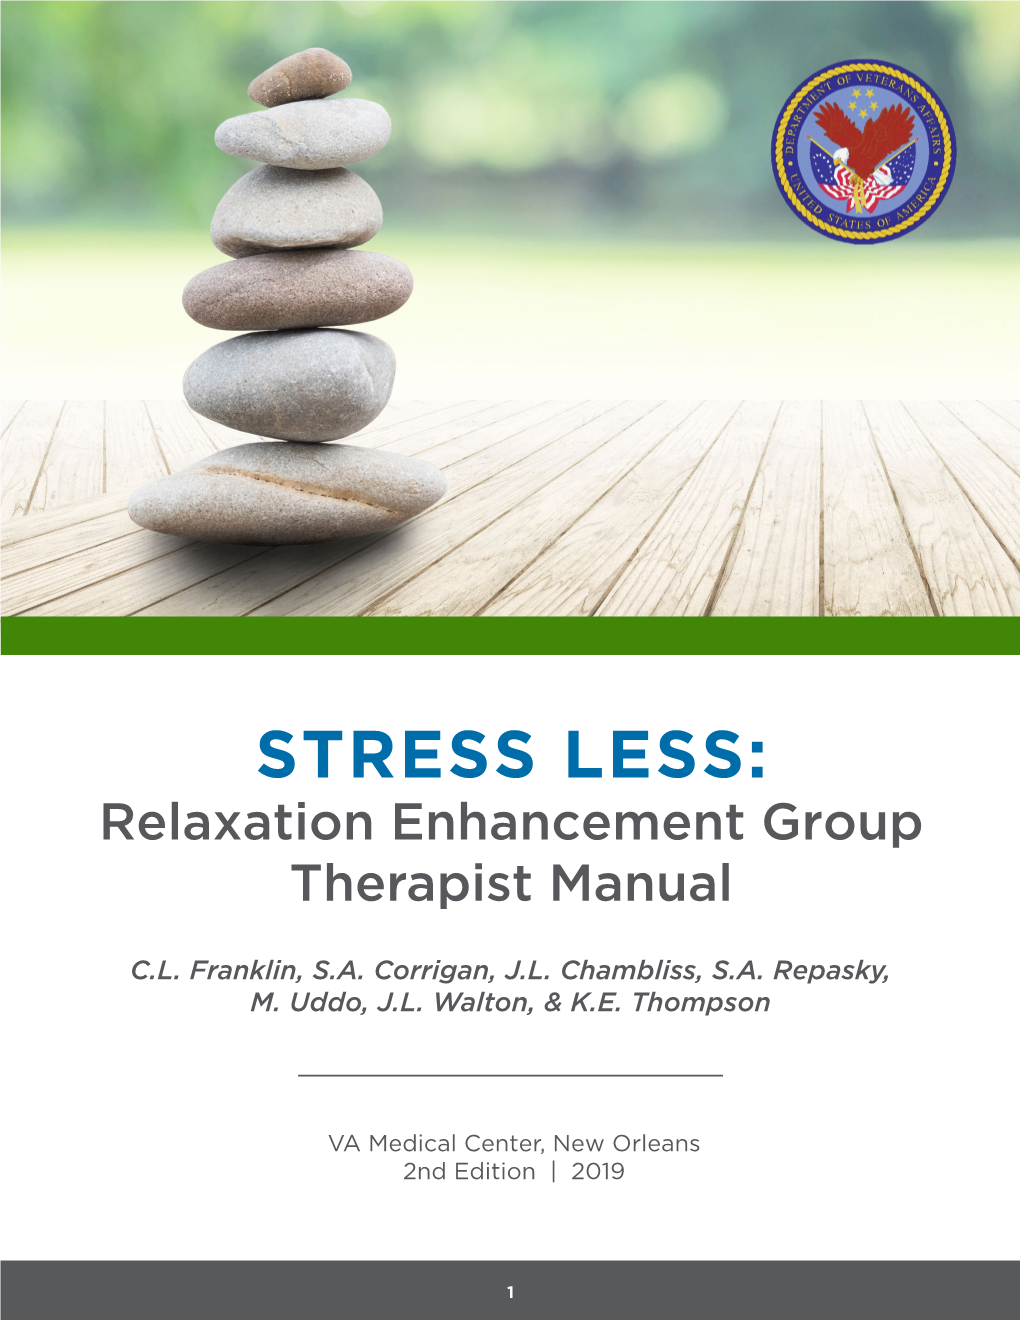 STRESS LESS: Relaxation Enhancement Group Therapist Manual